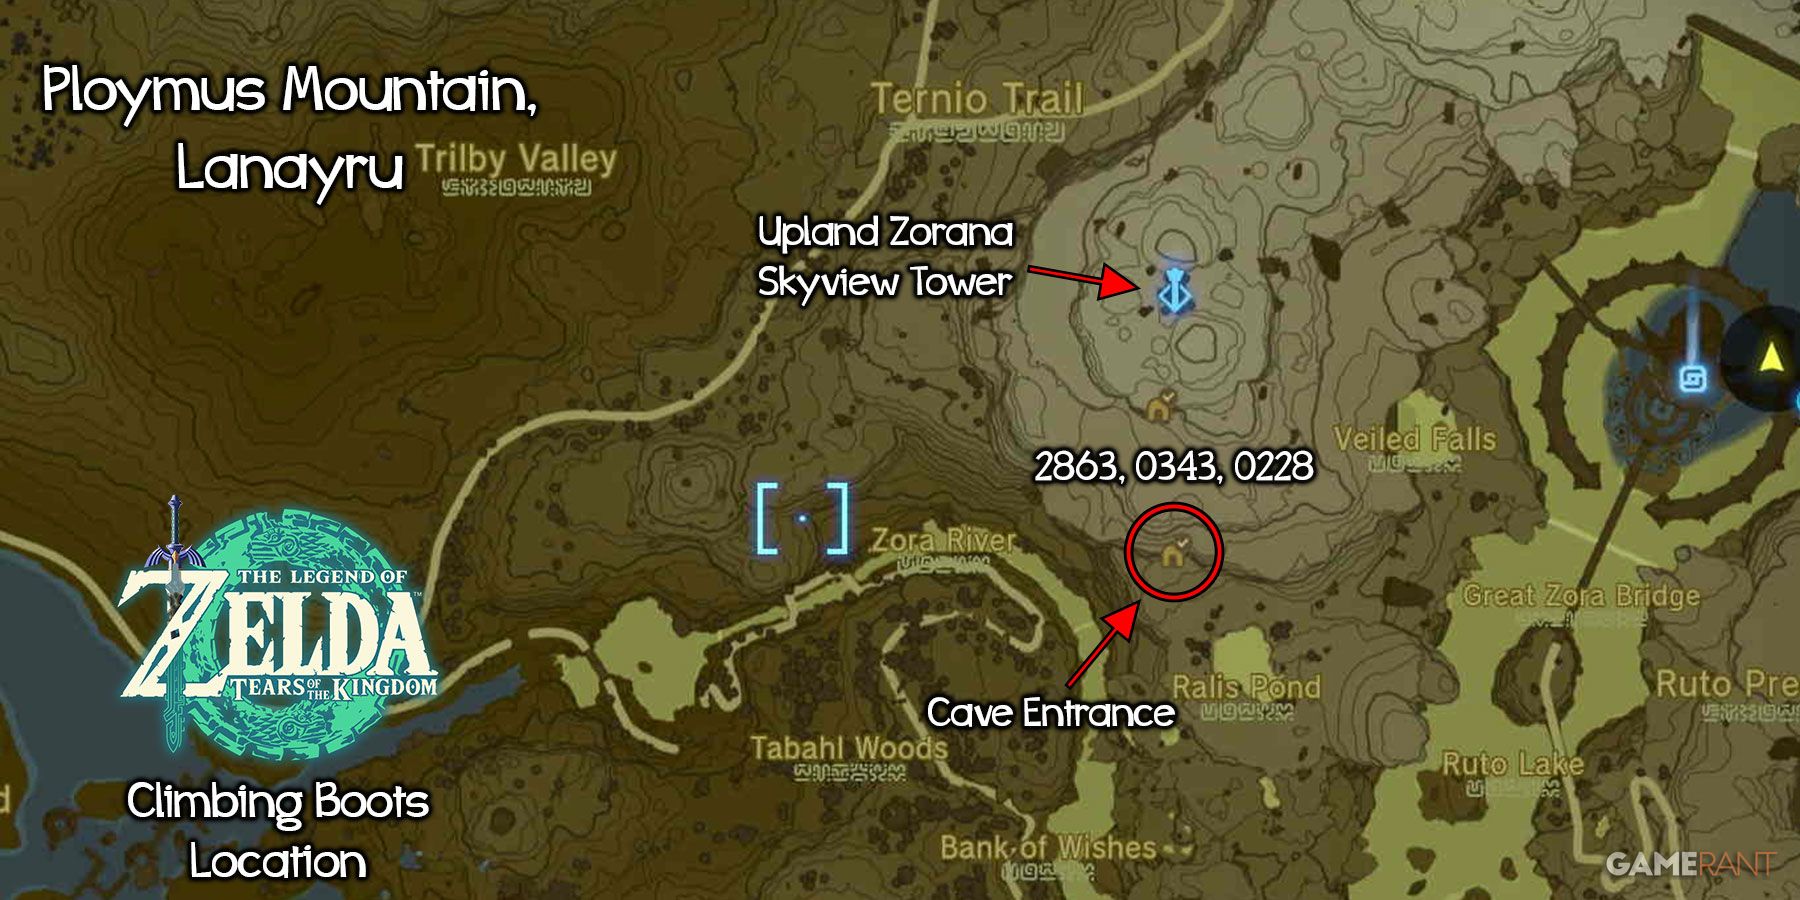 Climbing Boots location in Tears of the Kingdom.